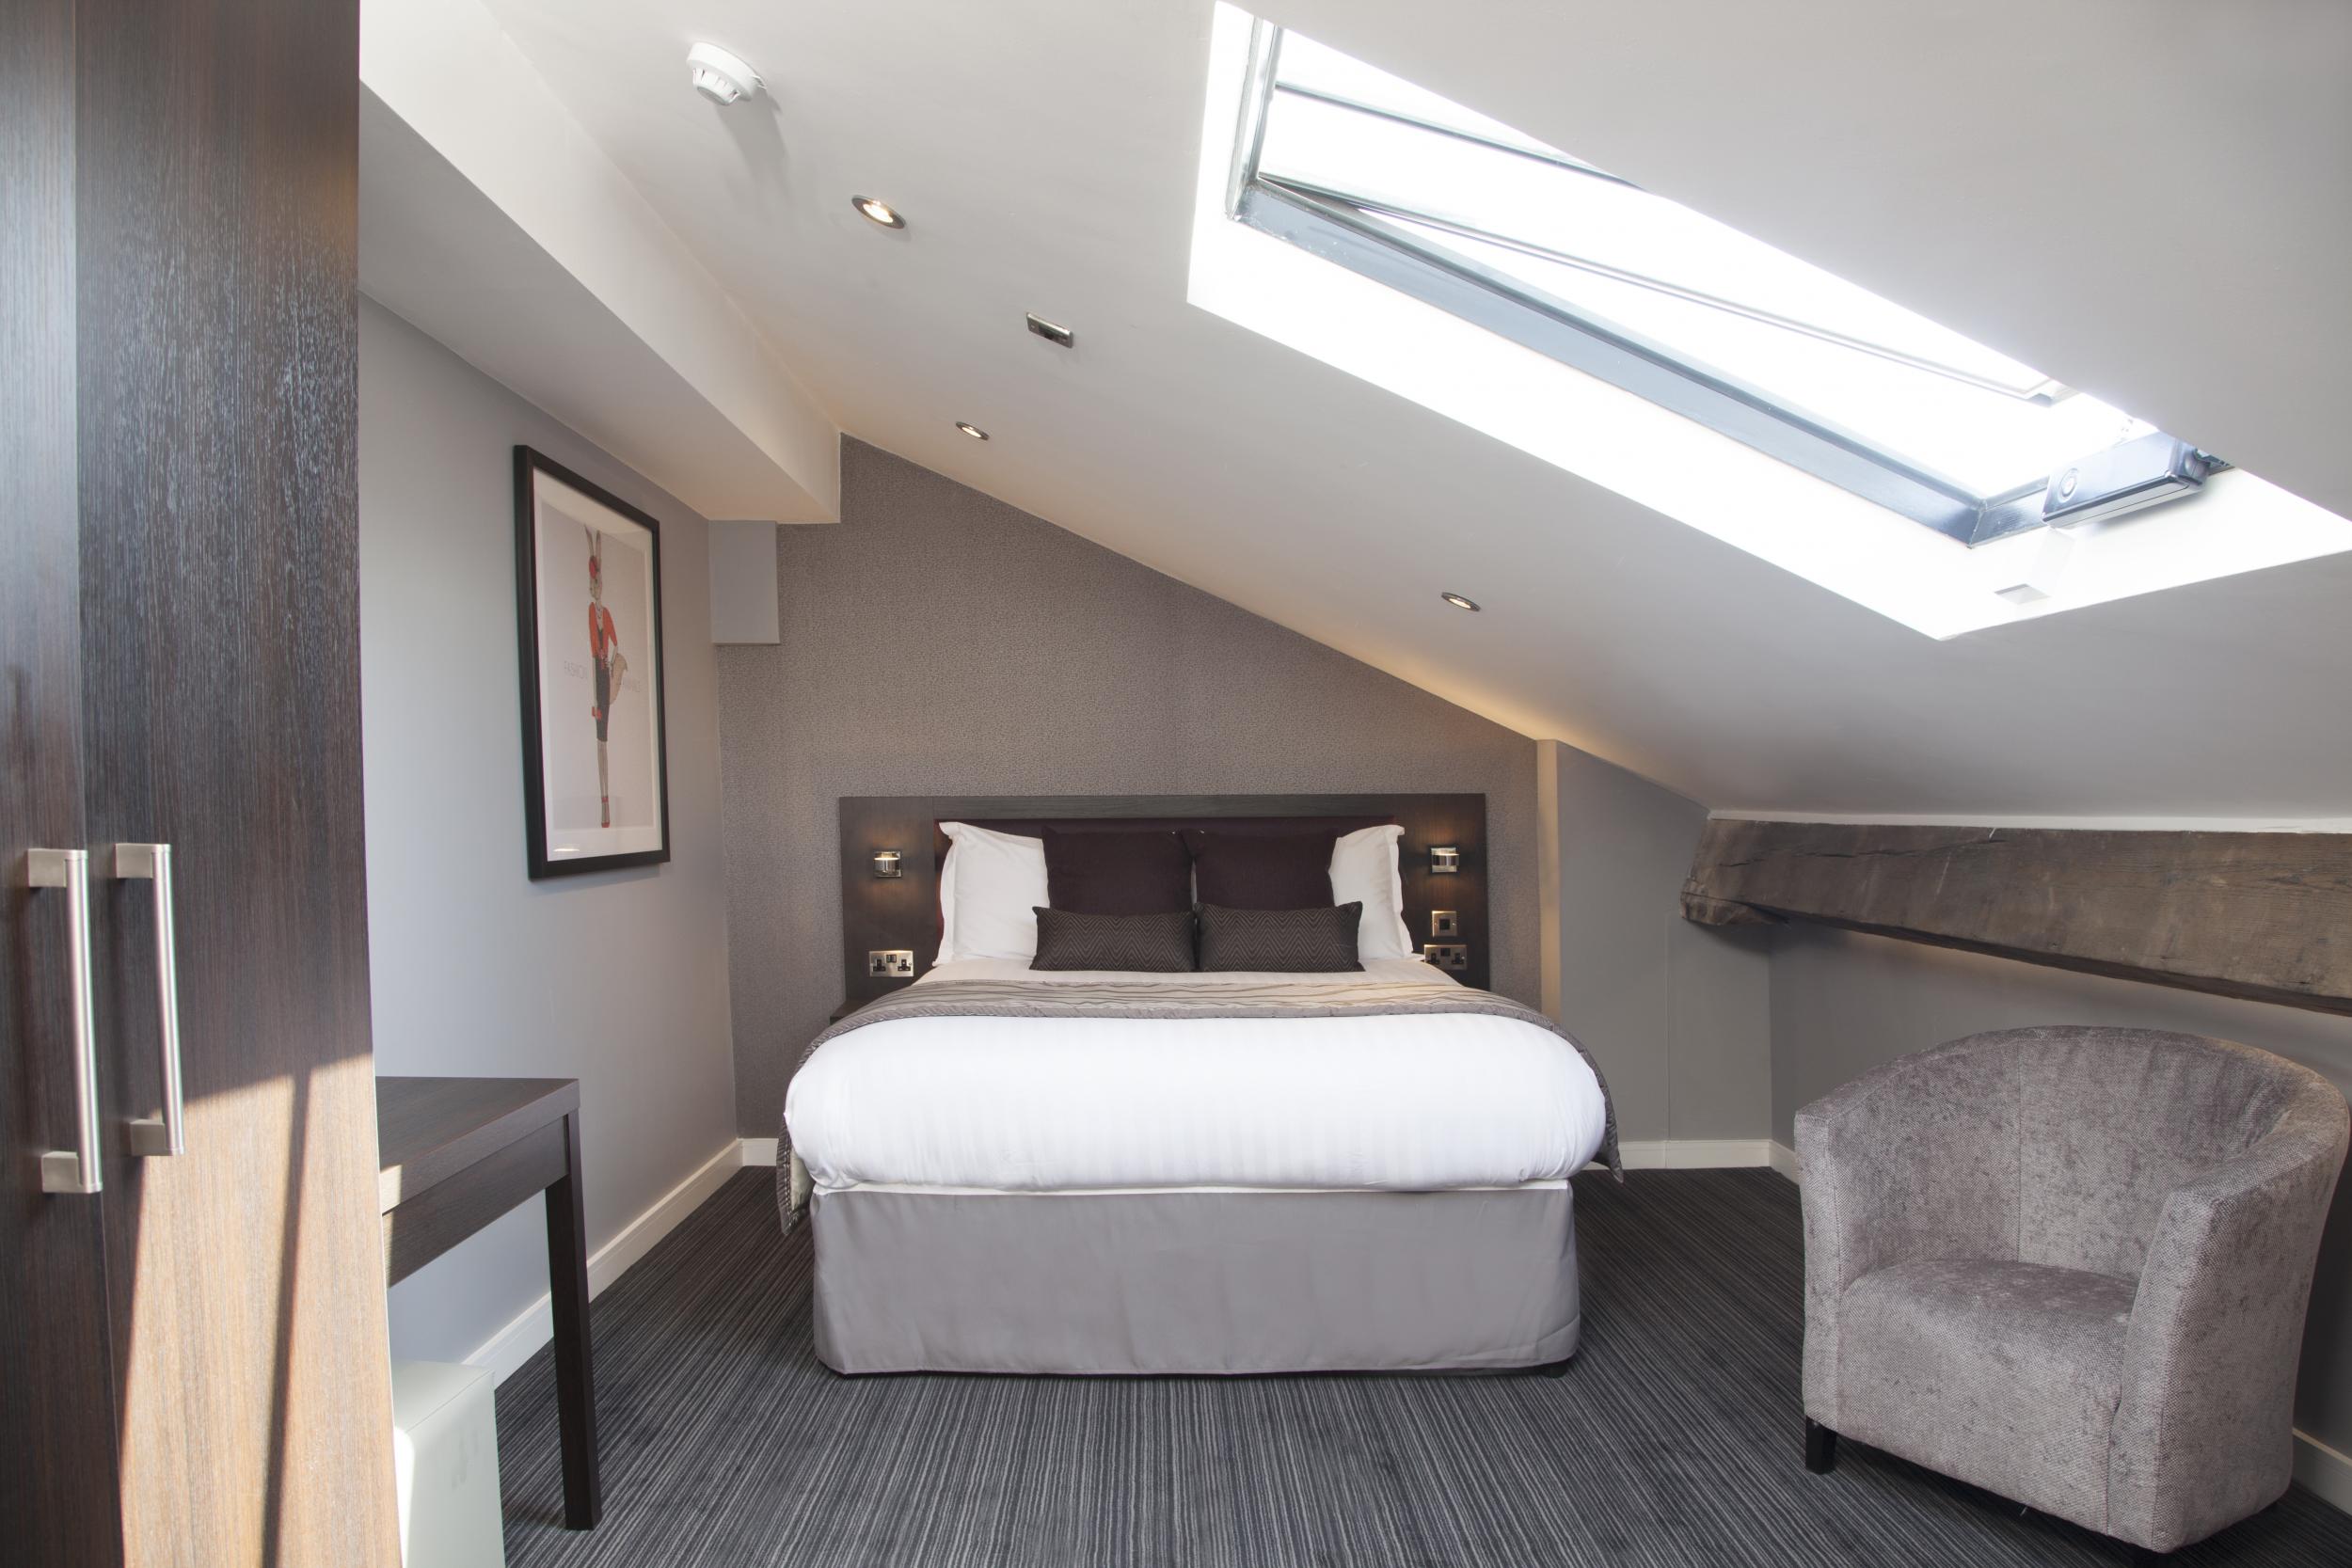 The Epic Apart Hotel is ideal for those wanting a self-catering option